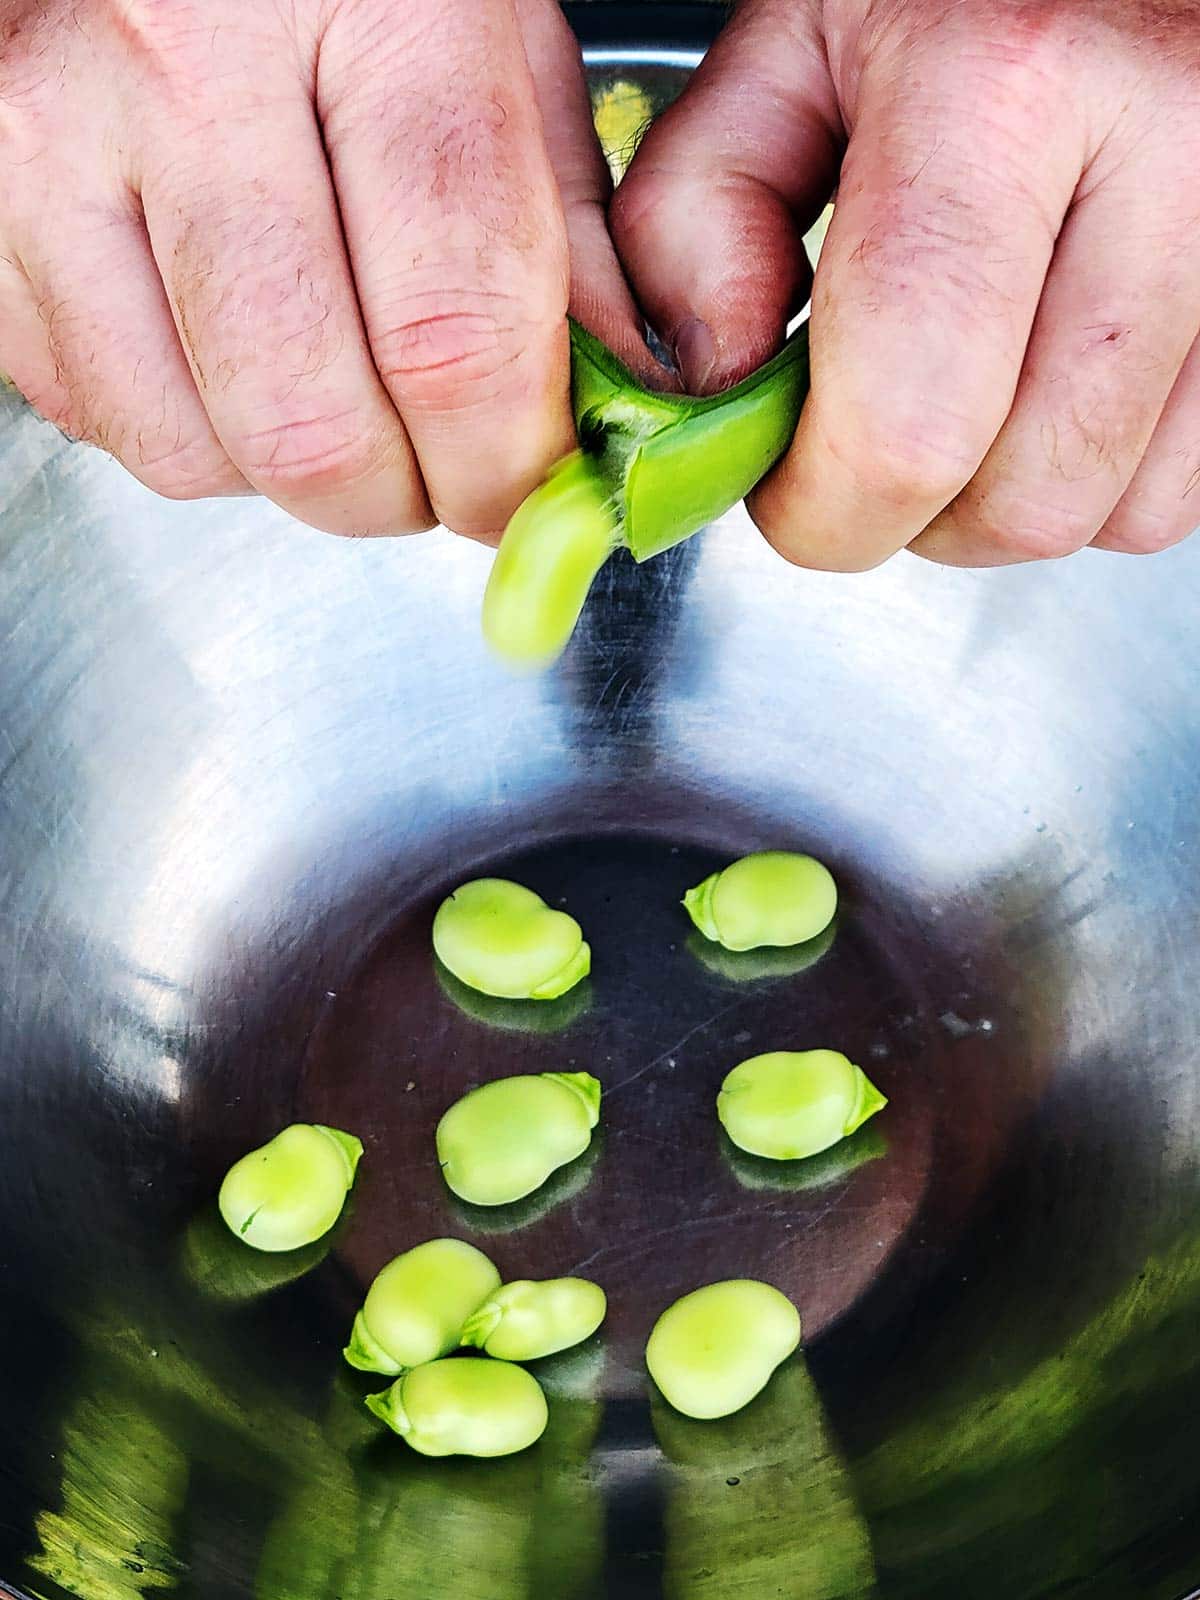 Popping fava beans from the pod